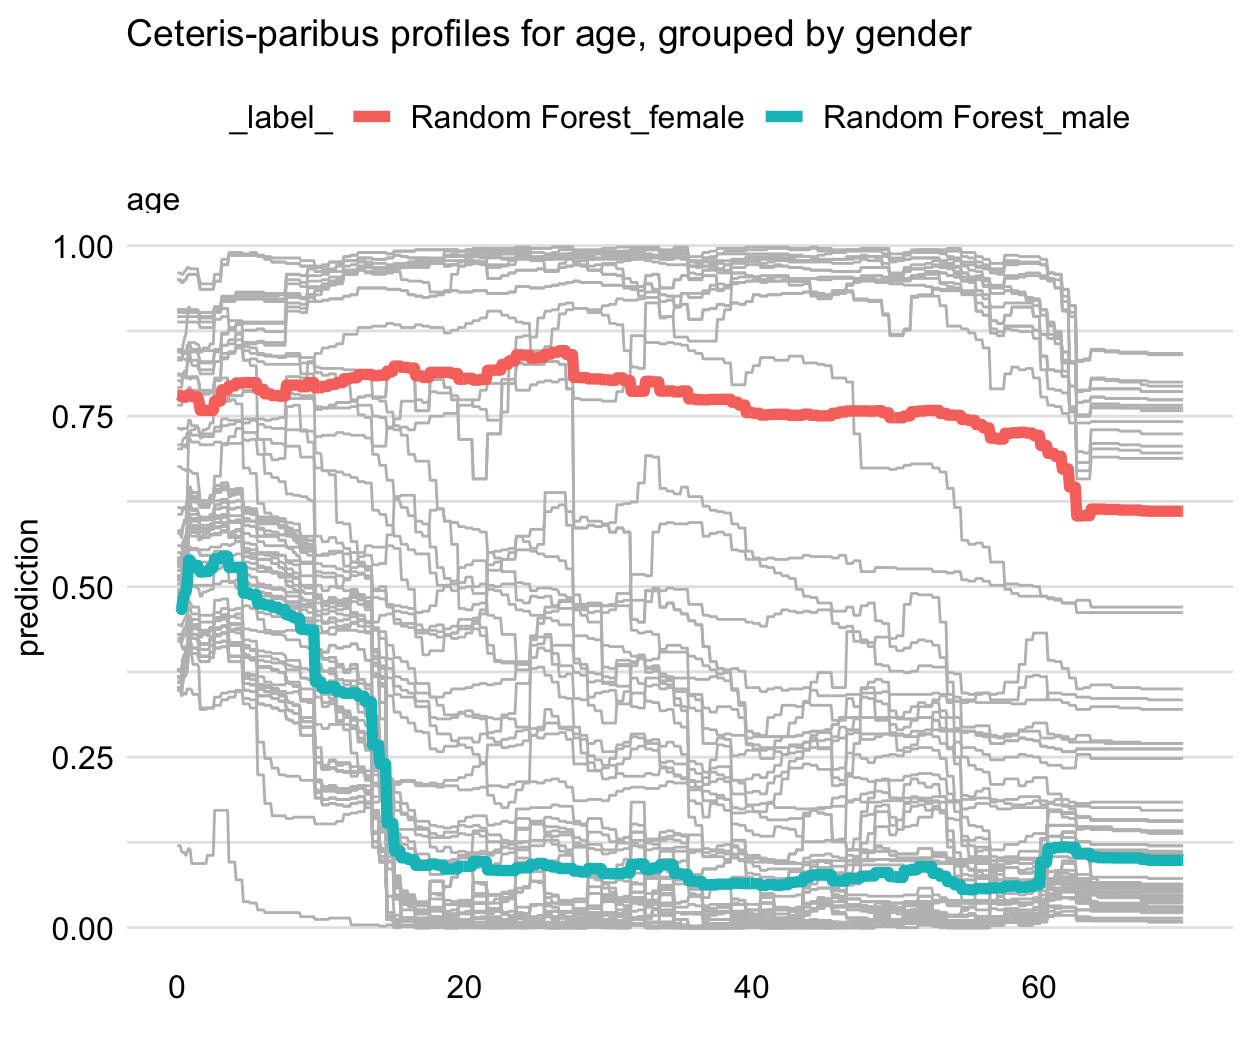 Partial-dependence profiles for two genders for the random forest model for 100 randomly selected observations from the Titanic dataset. Grey lines indicate ceteris-paribus profiles for age.